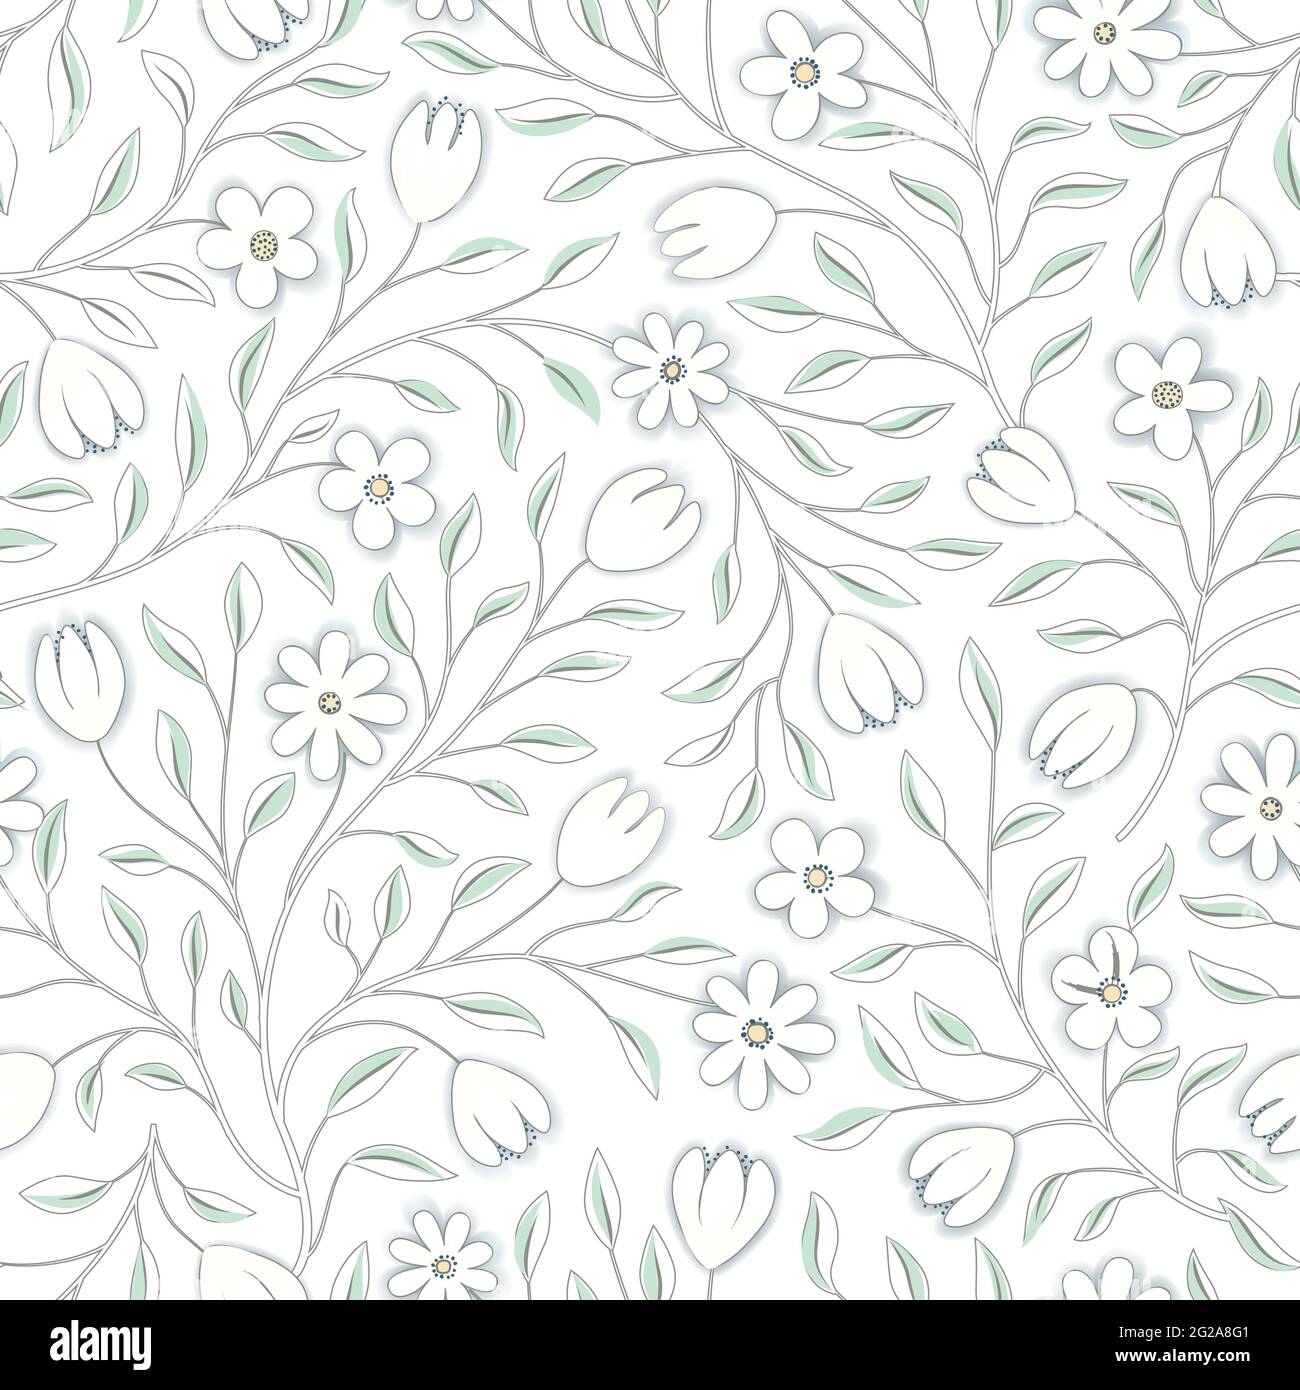 Floral seamless pattern. Flower background. Floral seamless texture with flowers. Flourish tiled white spring wallpaper Stock Vector